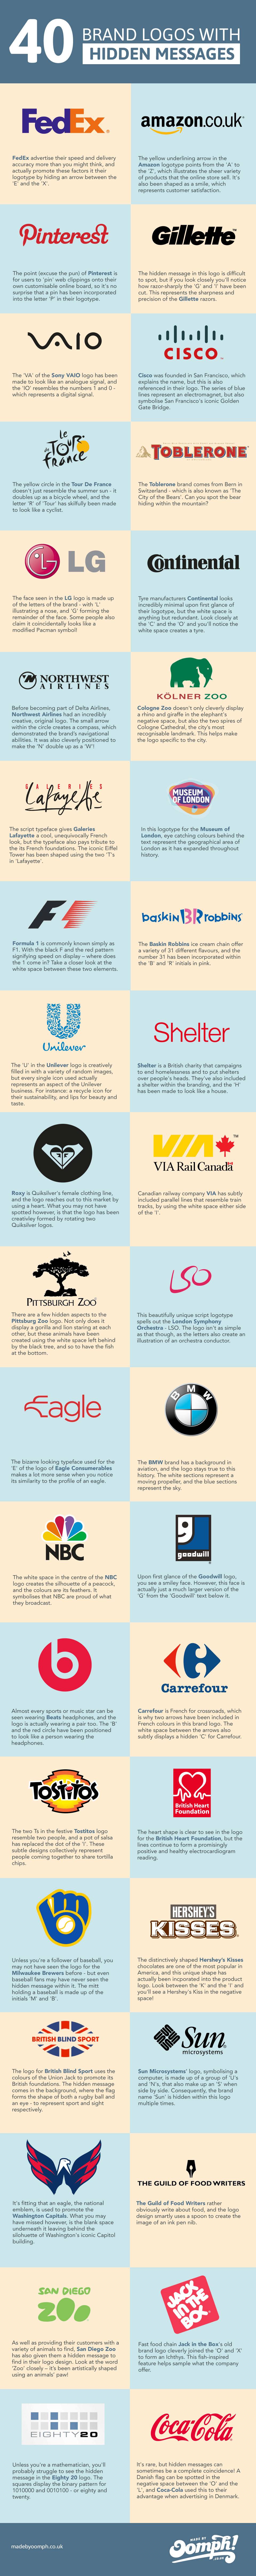 Red Sports Brand Logo - The Secret Meanings Behind 40 Brand Logos